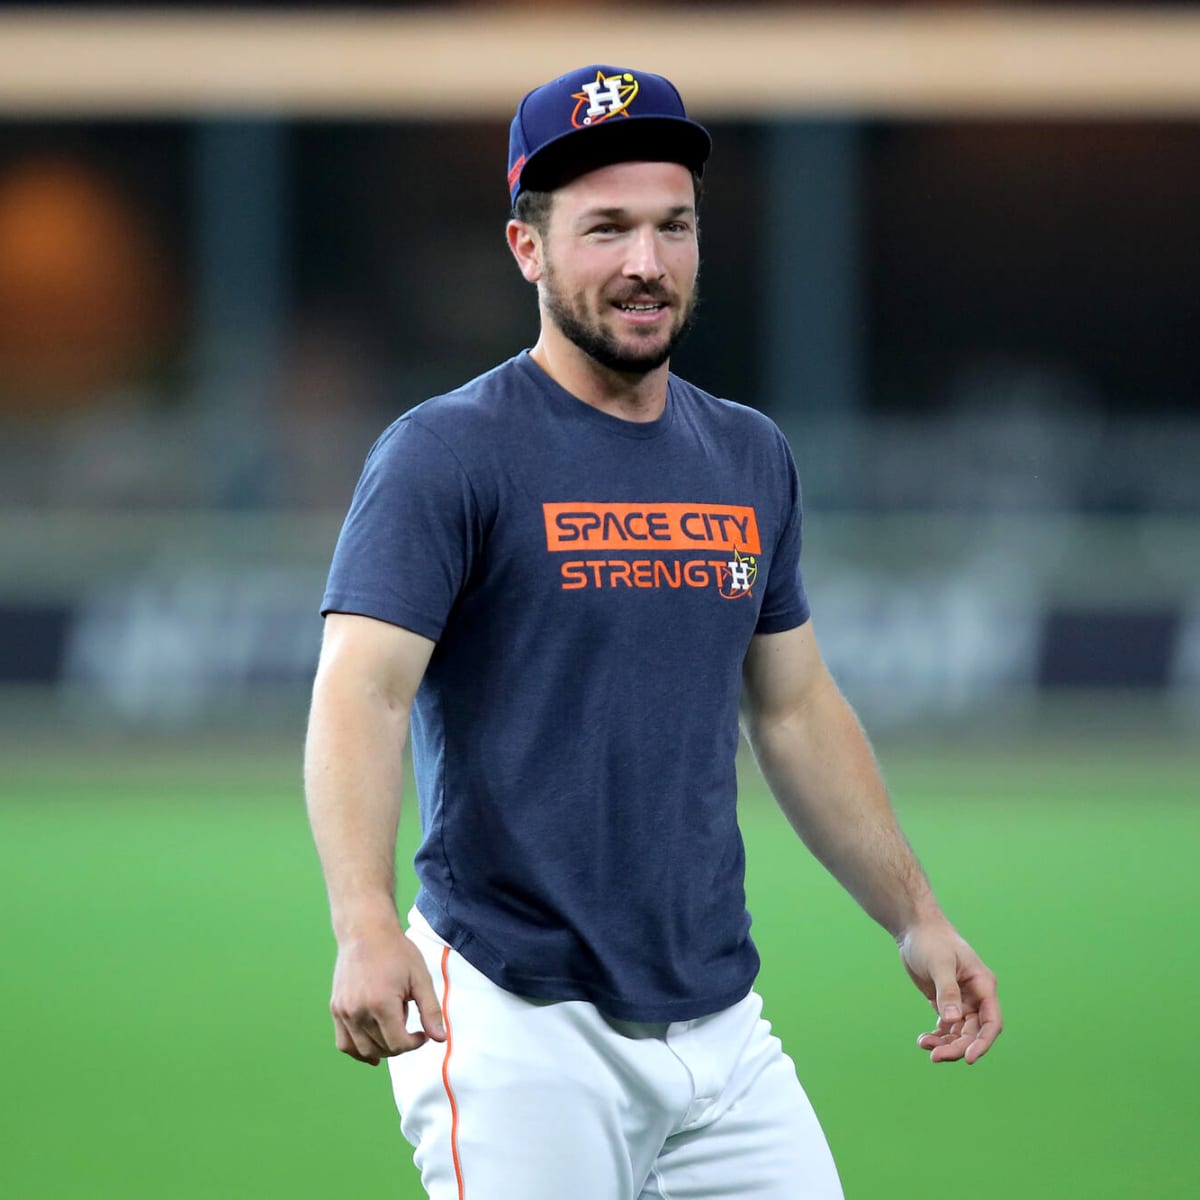 Alex Bregman: Astros want to win World Series for Dusty Baker